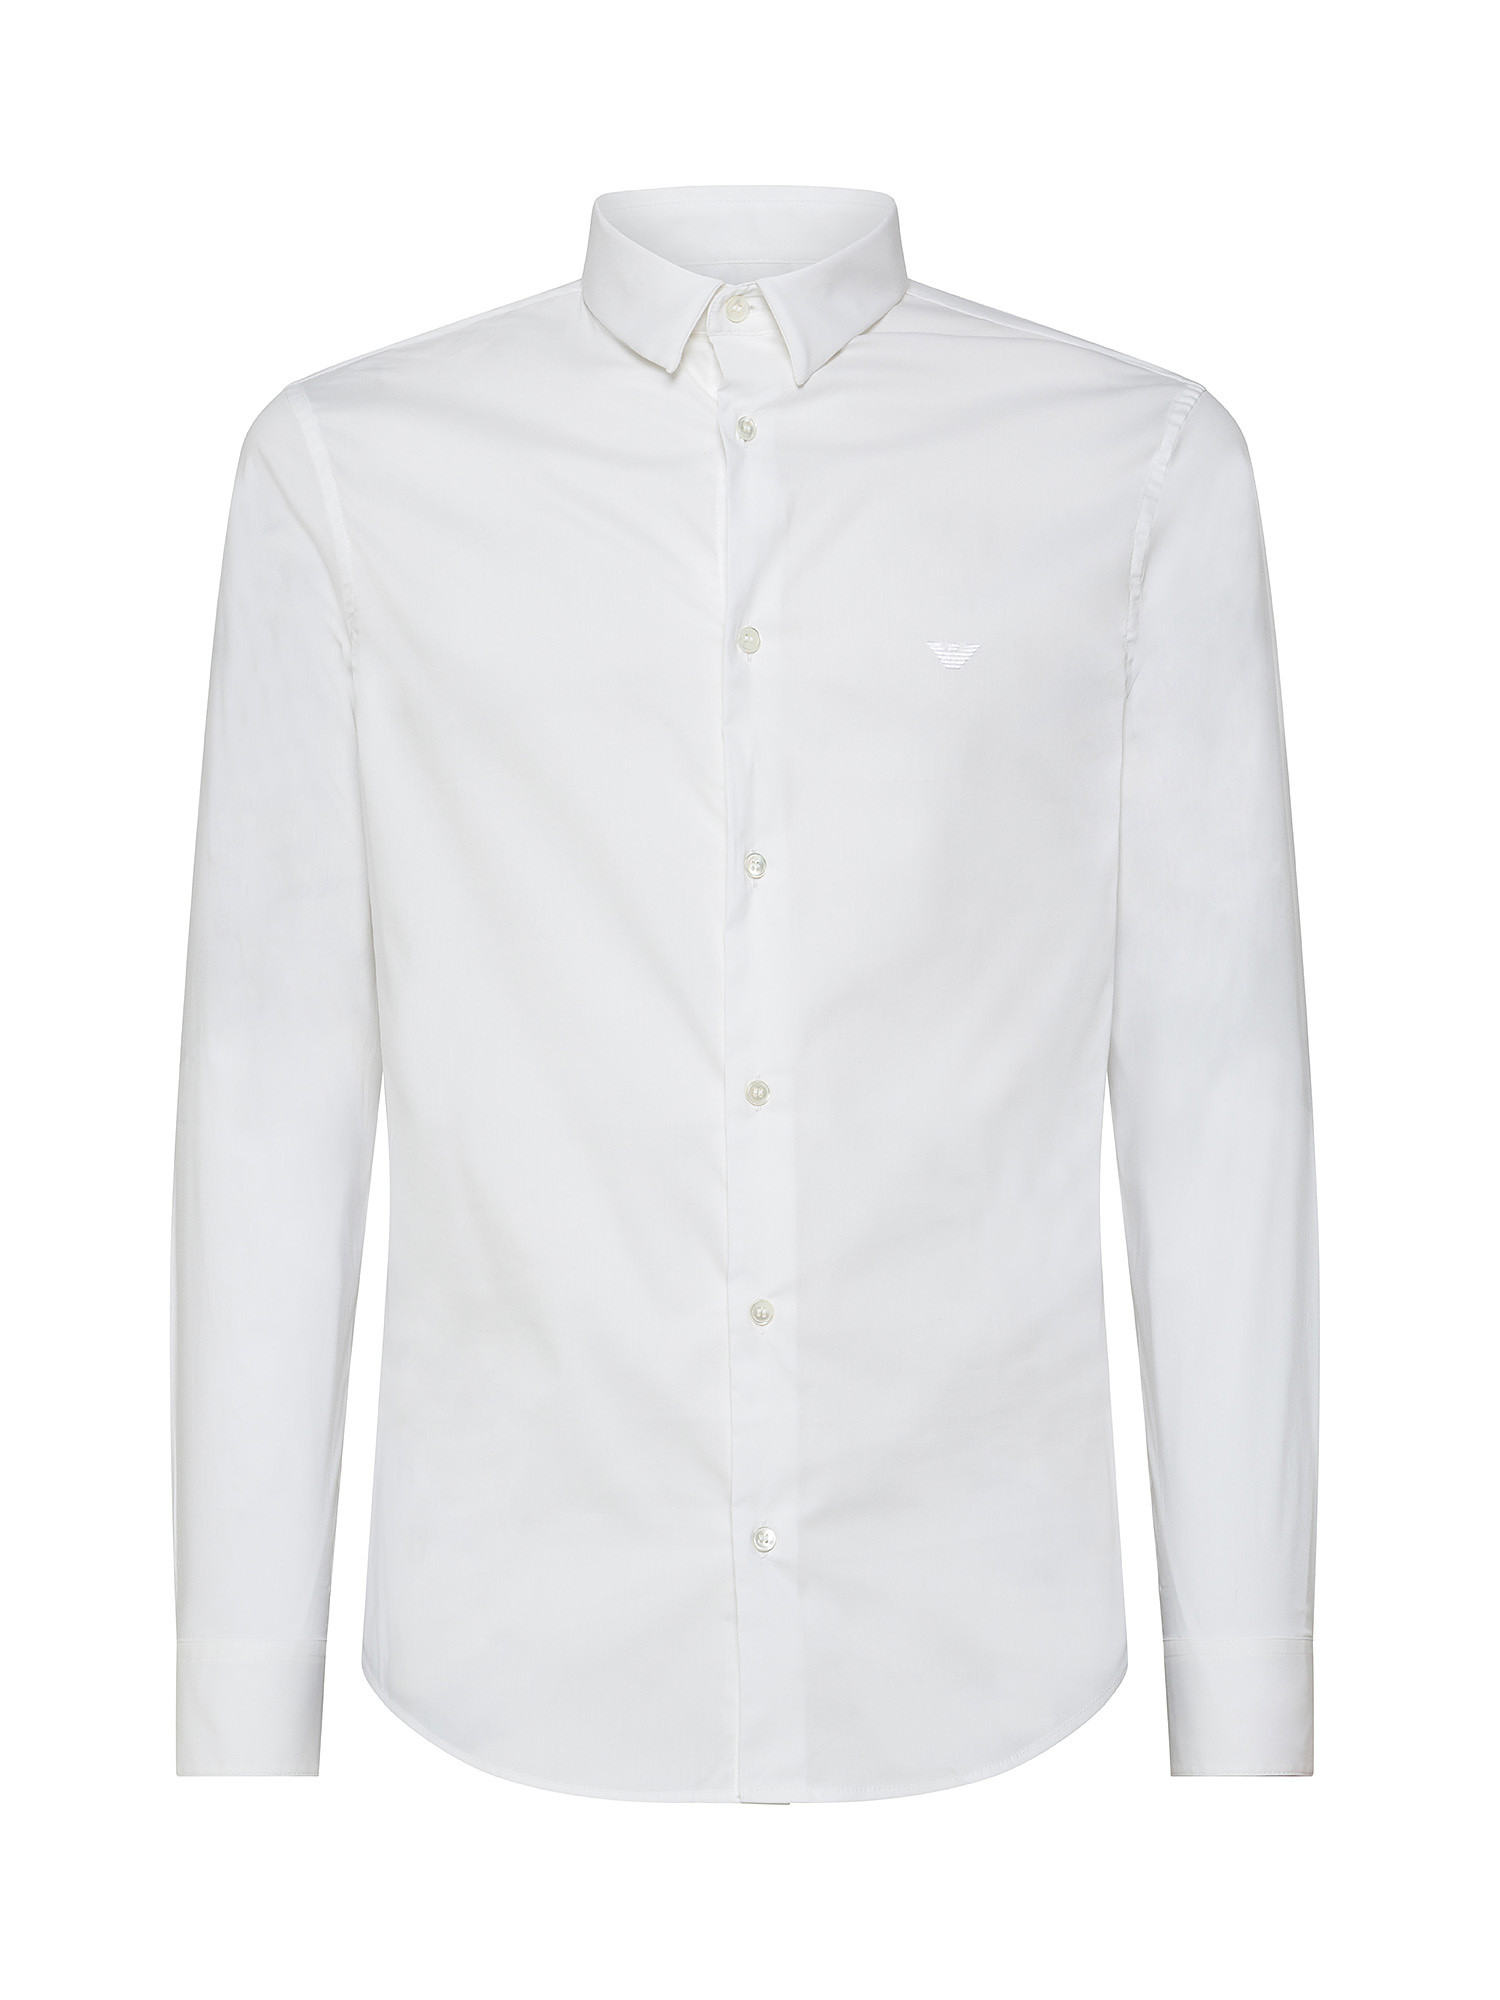 Emporio Armani - Shirt with embroidered logo, White, large image number 1